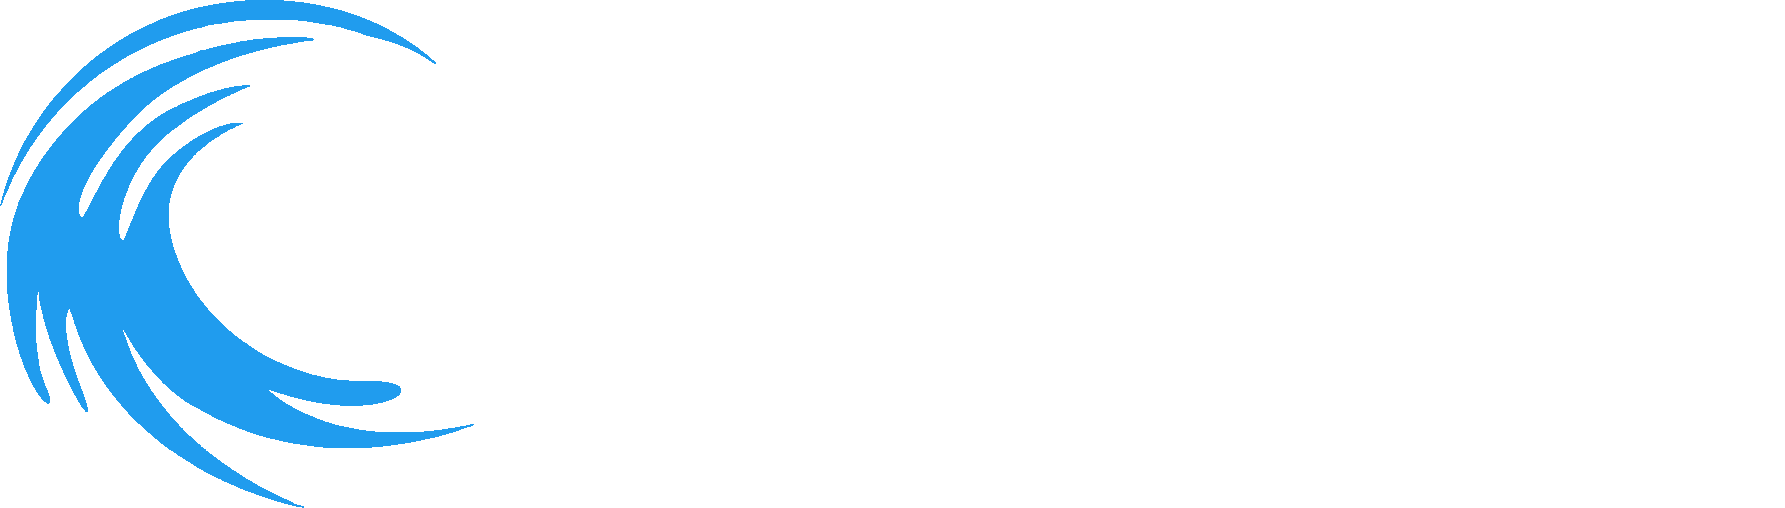 A Time To Heal: Psychotherapy | EMDR | Neurofeedback